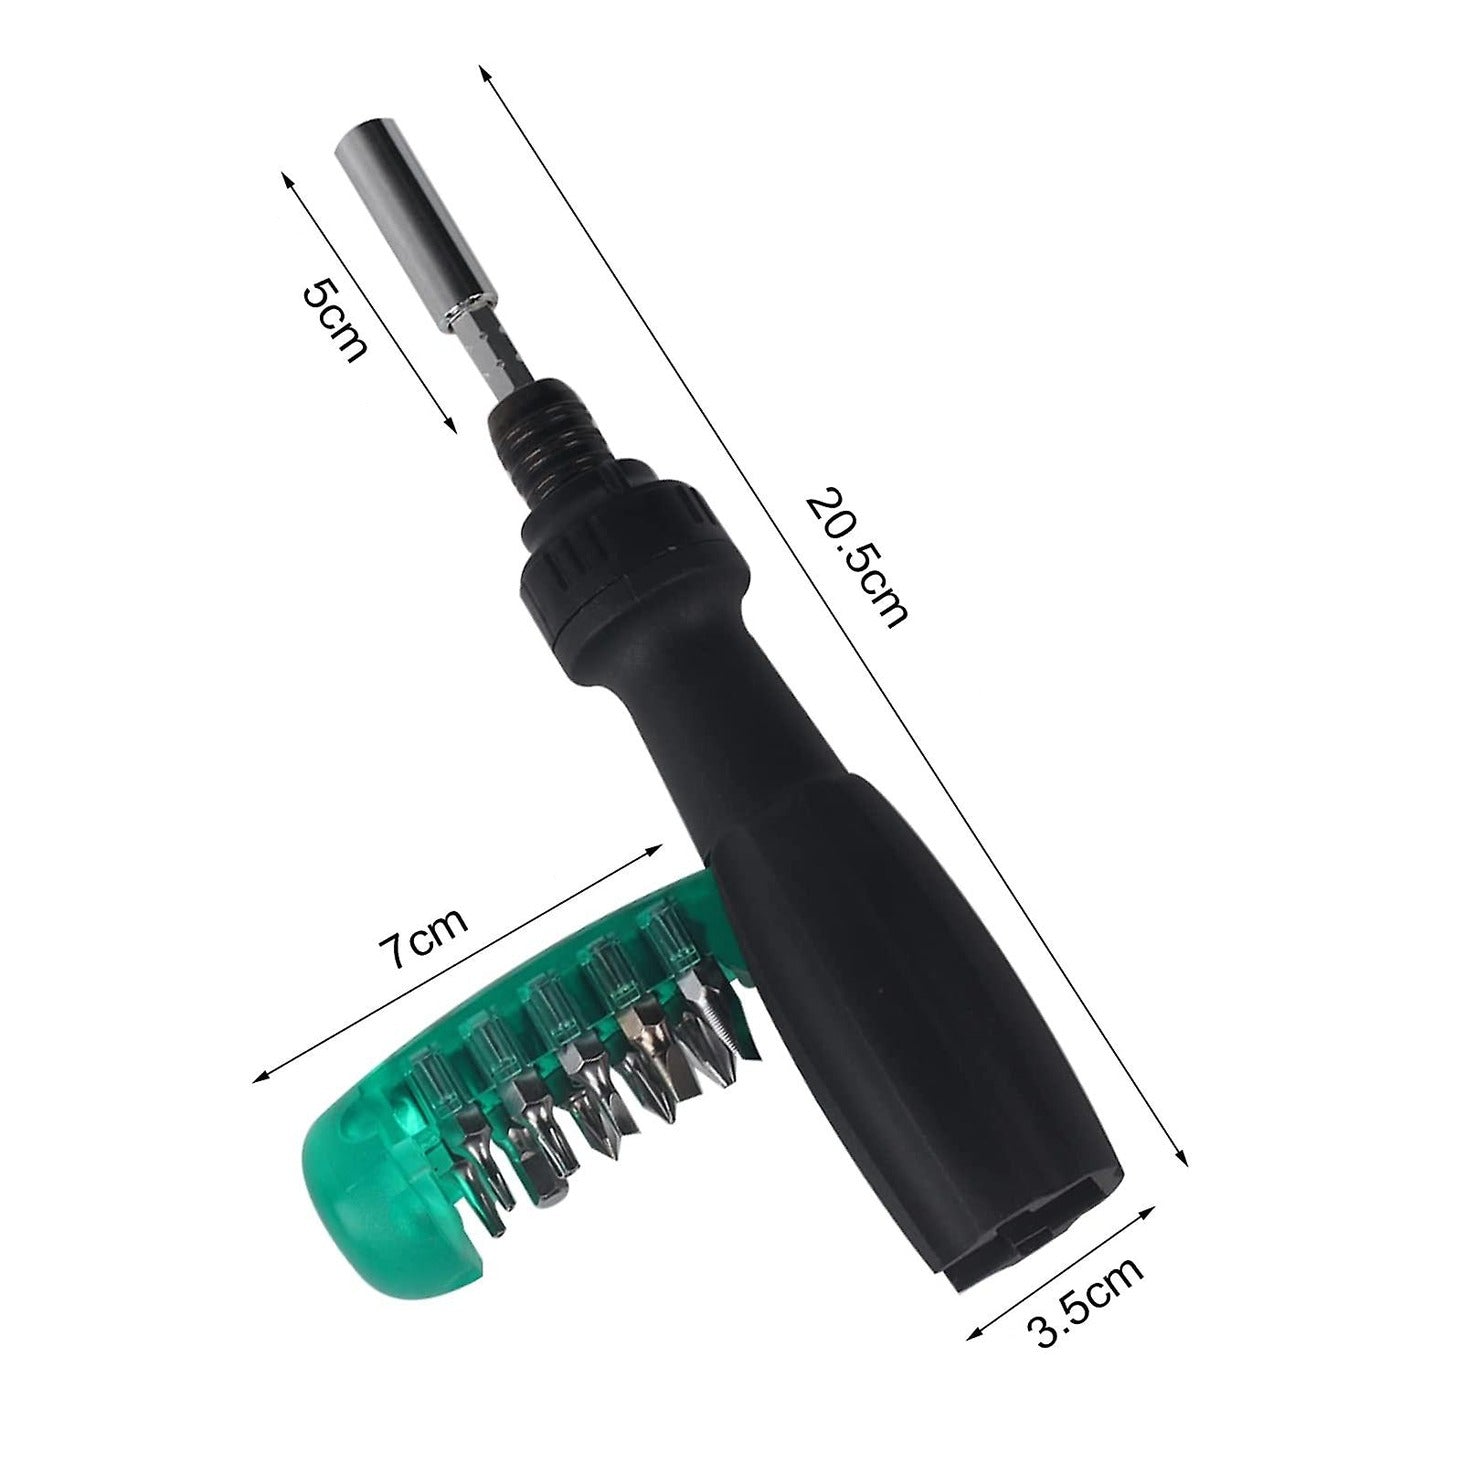 10-in-1 Ratchet Screwdriver with its size